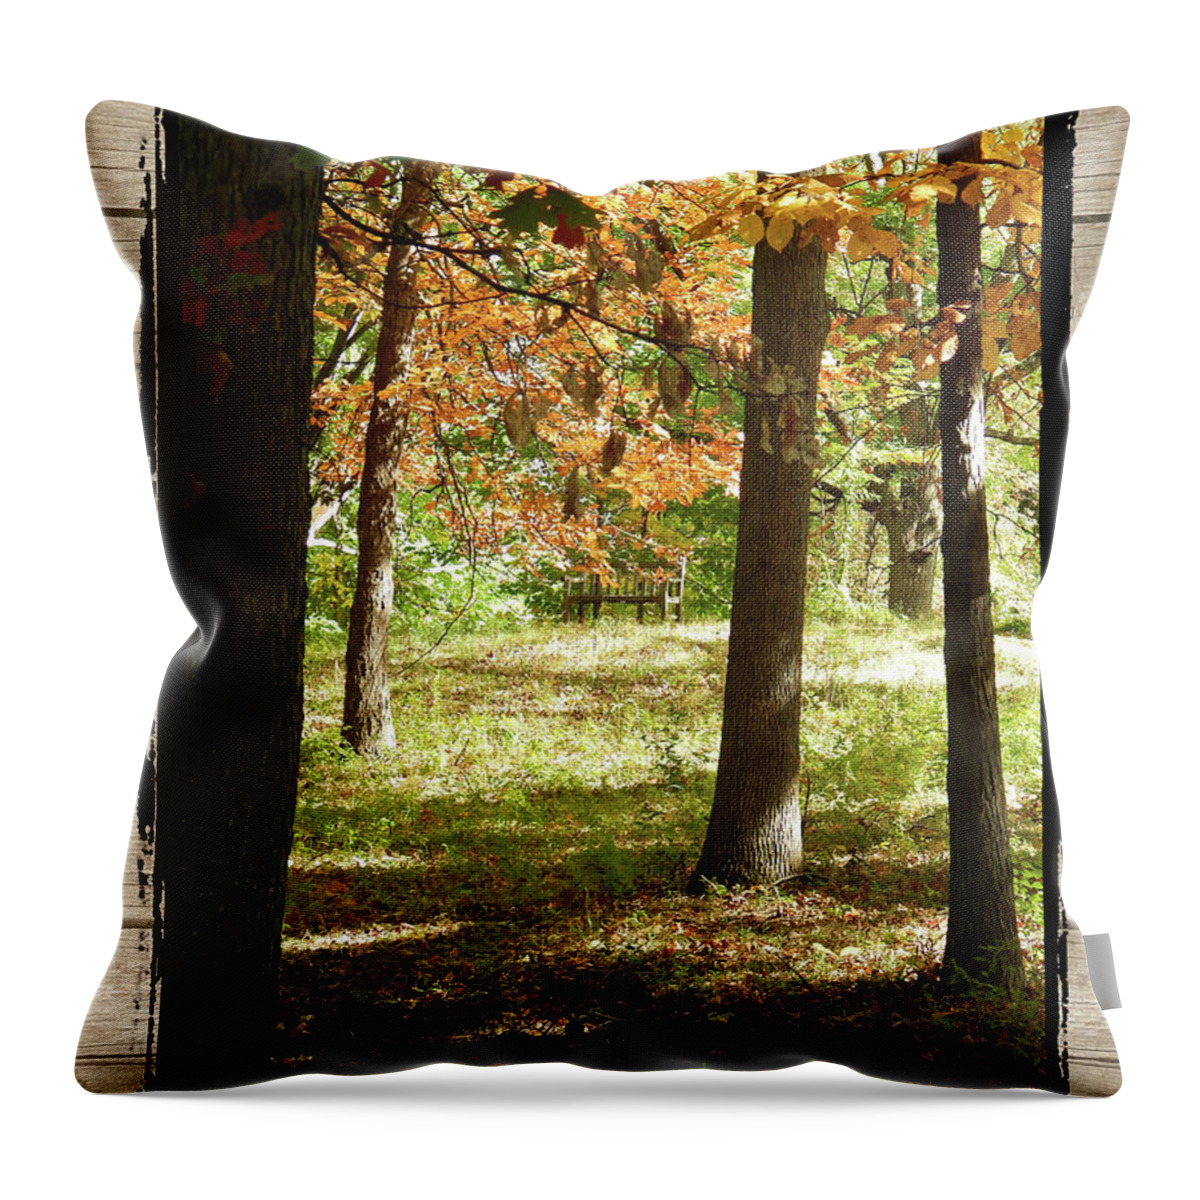 Ann Arbor Throw Pillow featuring the photograph Bench In The Woods by Phil Perkins